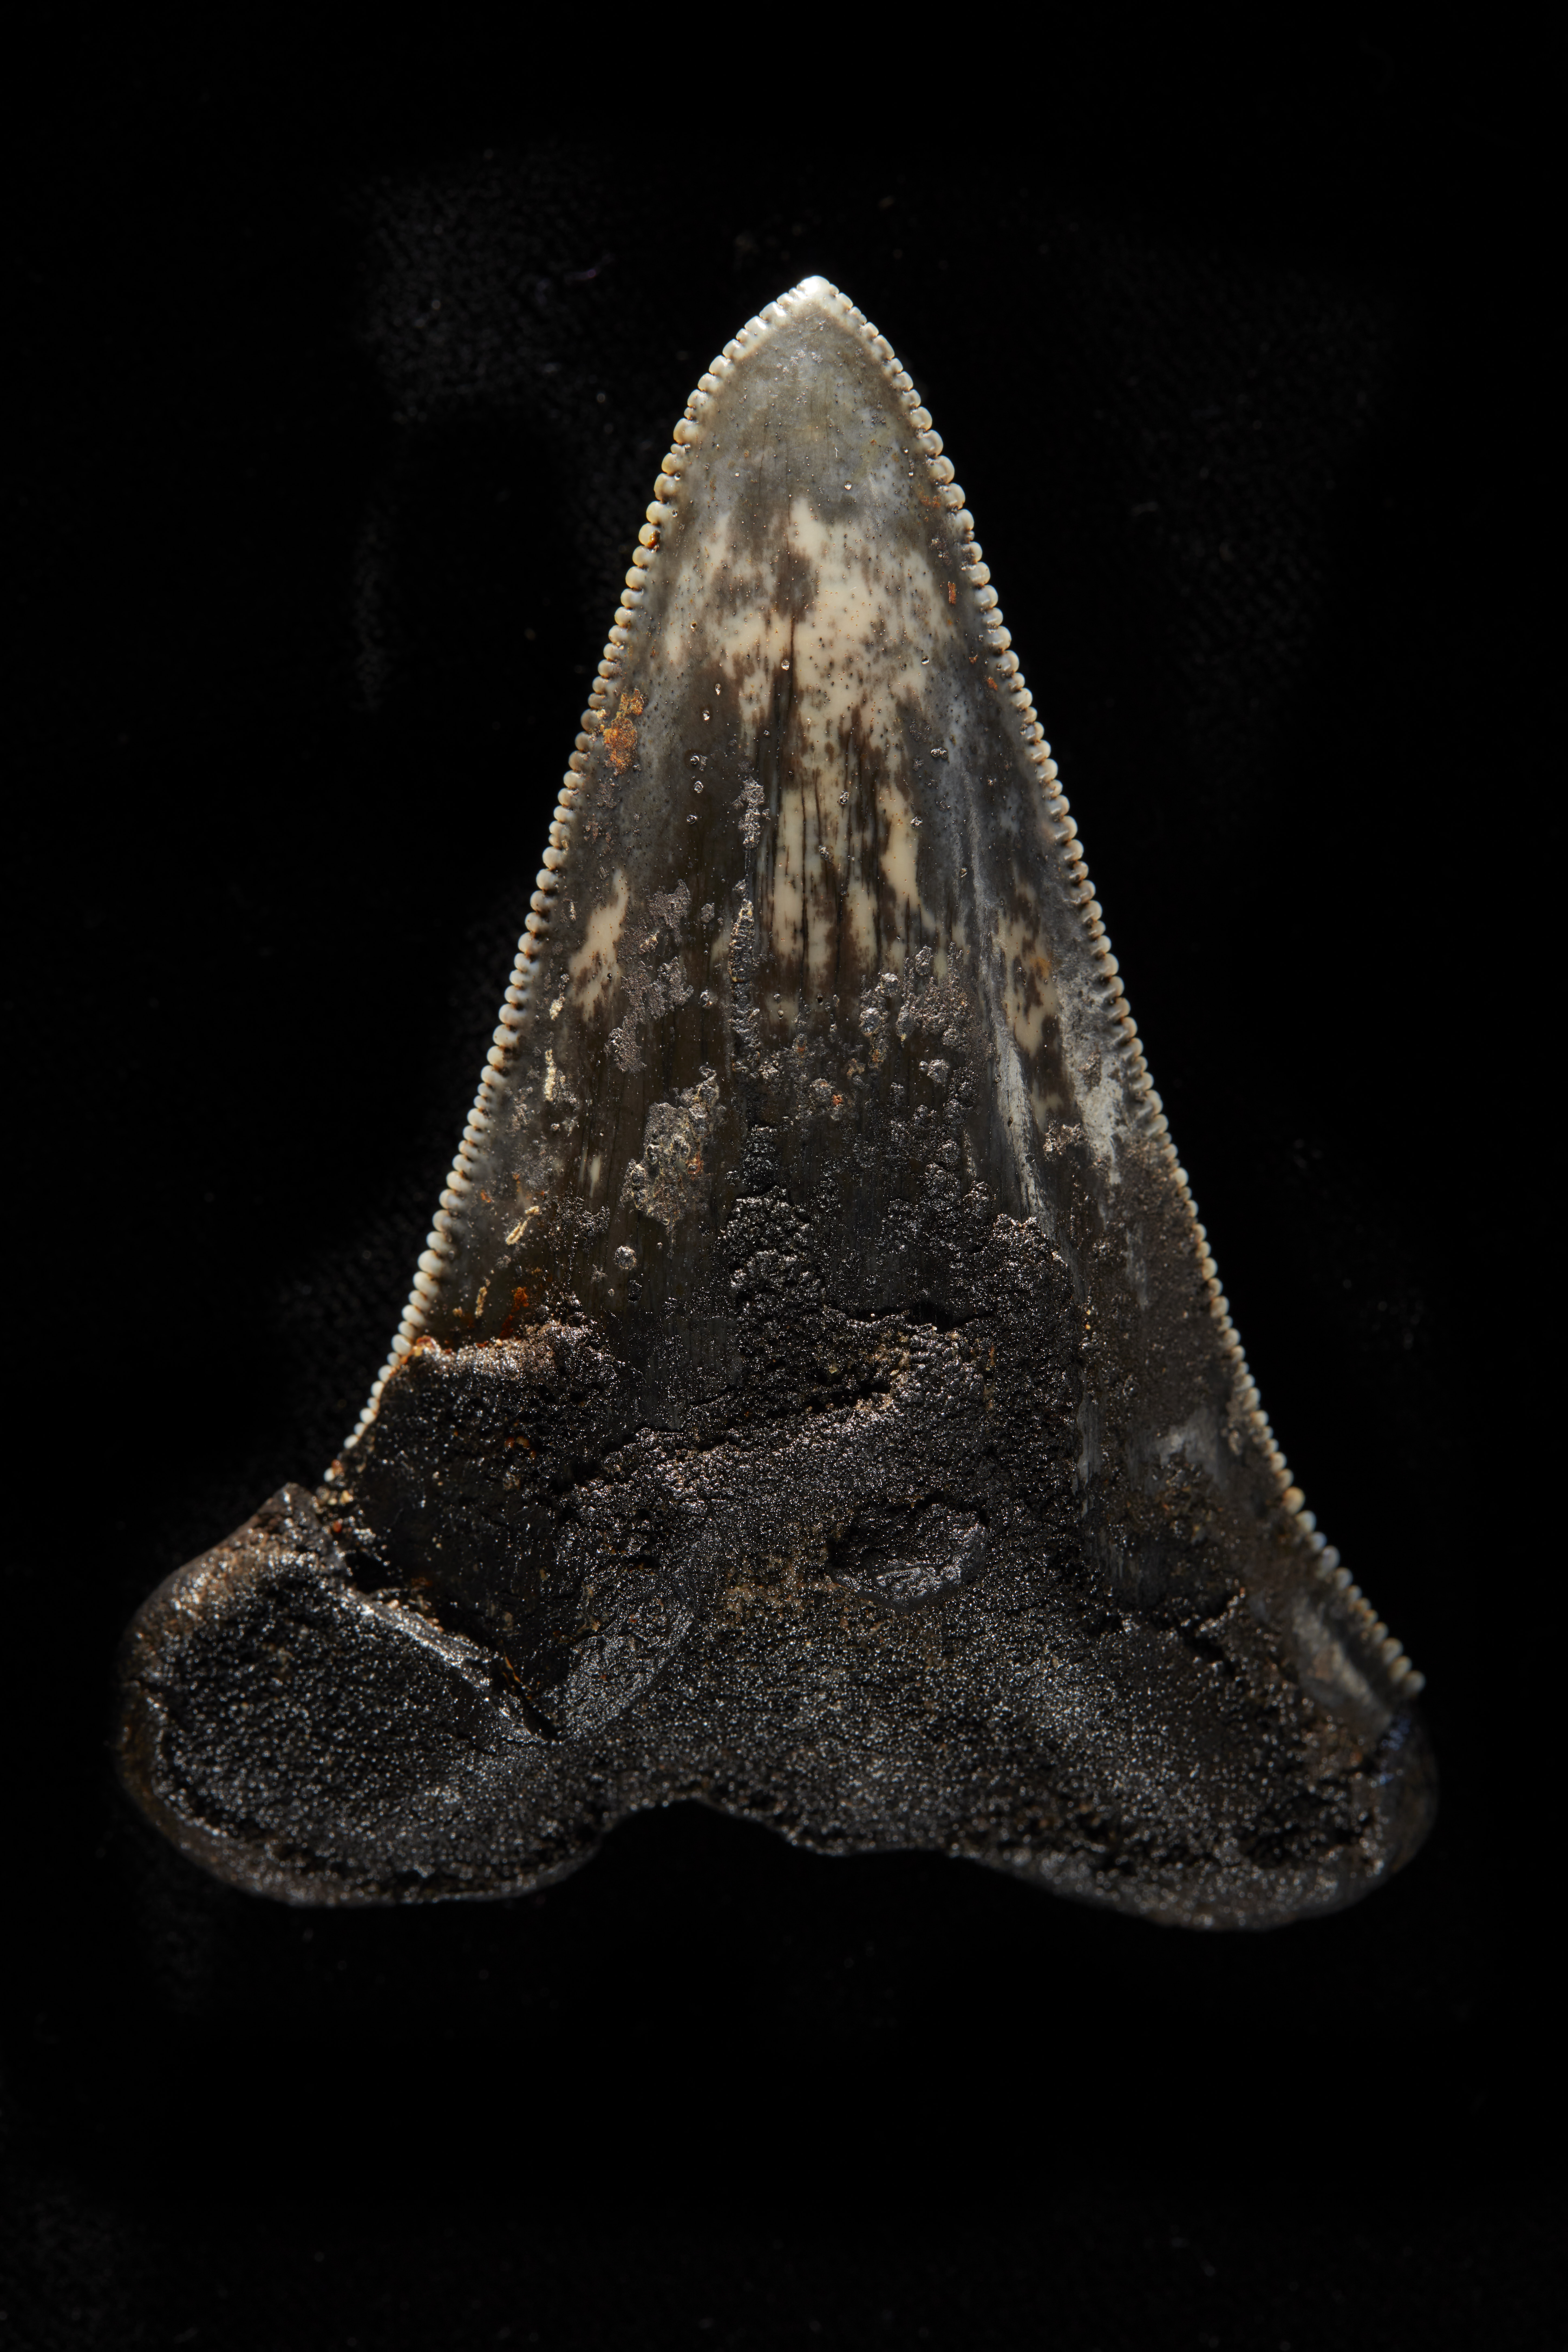 4 Tooth from megalodon ancestor collected from seafloor Credit Museums Victoria Ben Healley